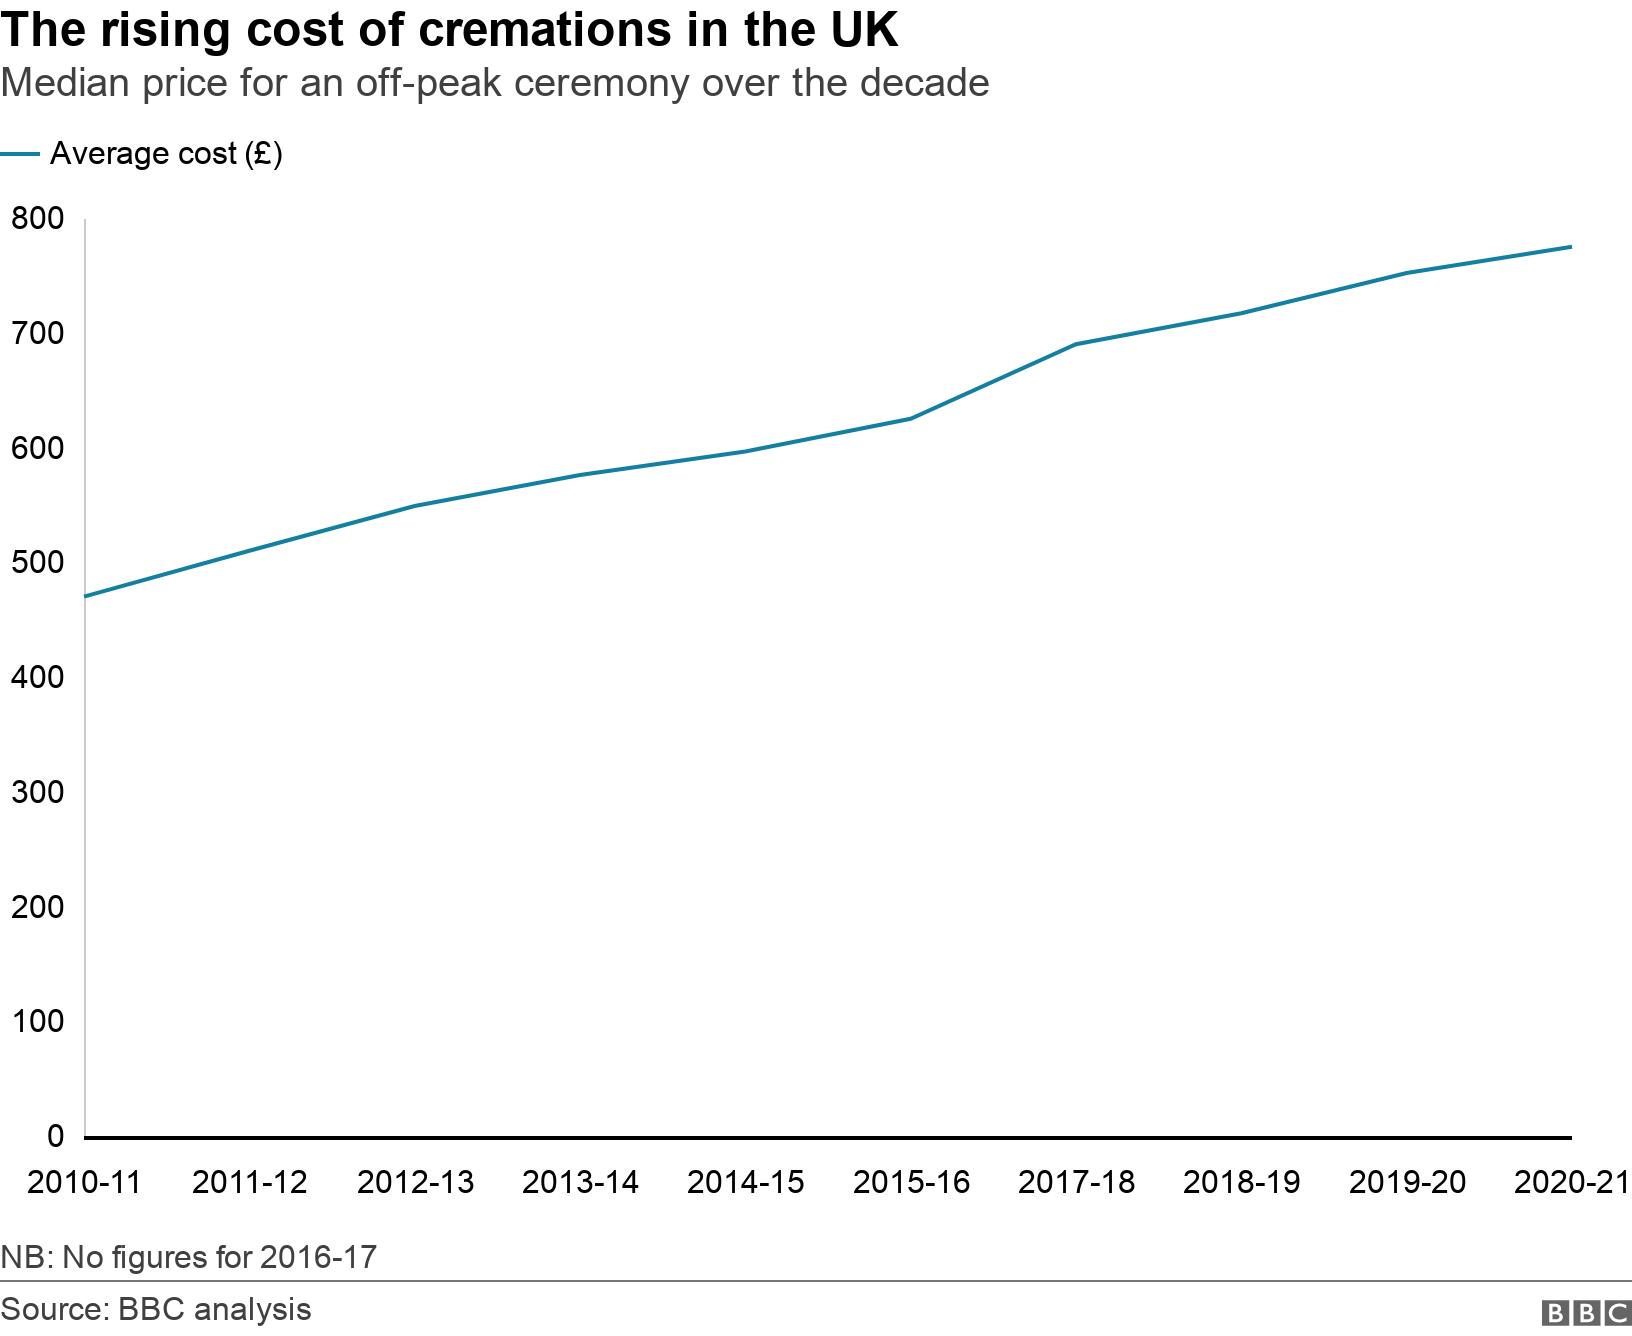 The rising cost of cremations in the UK. Median price for an off-peak ceremony over the decade. The chart shows how the average cost of a cremation in the UK has risen from ?470 to ?752 over the past decade. NB: No figures for 2016-17.